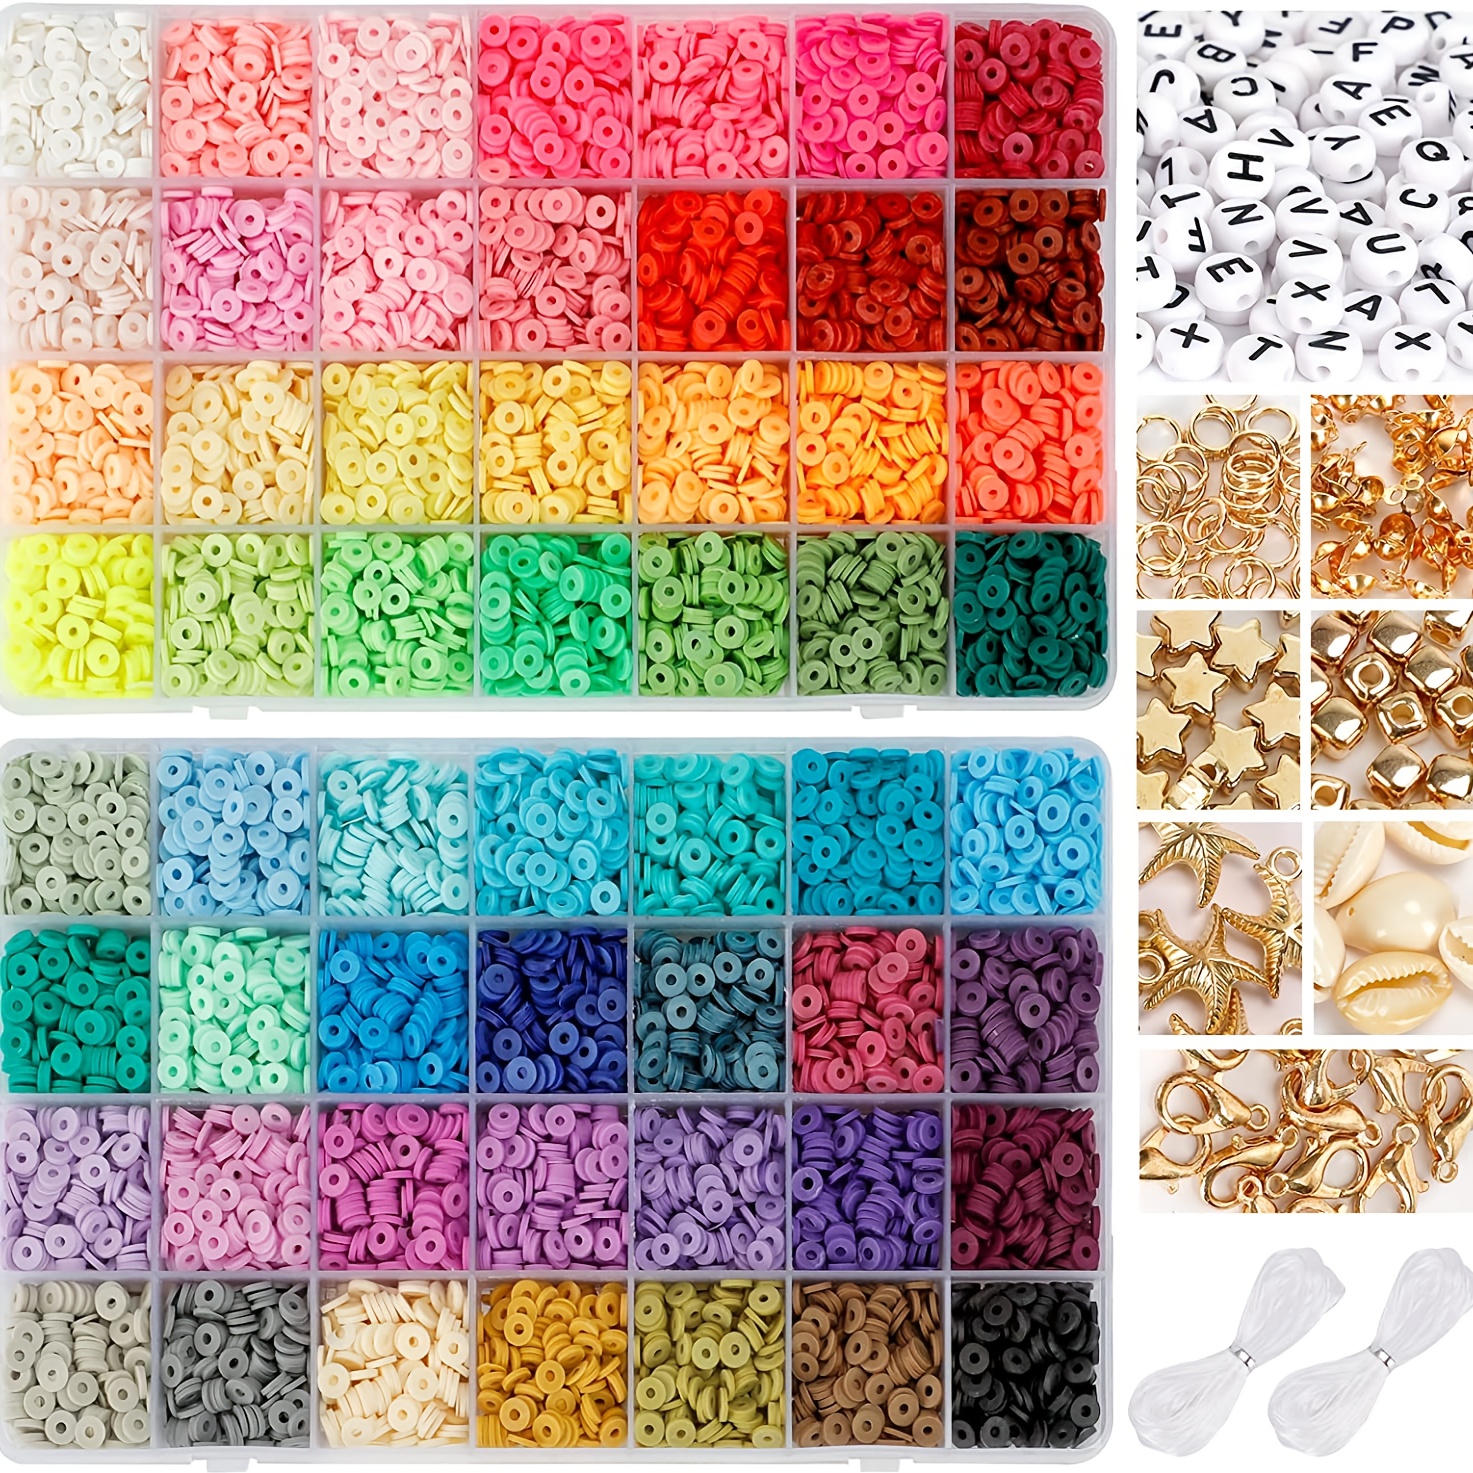 Polymer Clay Beads for Jewelry Making, 18 Colors 6mm Colored Flat Round Clay  Beads for DIY Bracelets Craft Kit with A-Z Letter Beads, Shell Beads,  Elastic Cords, Charms and Jump Rings 